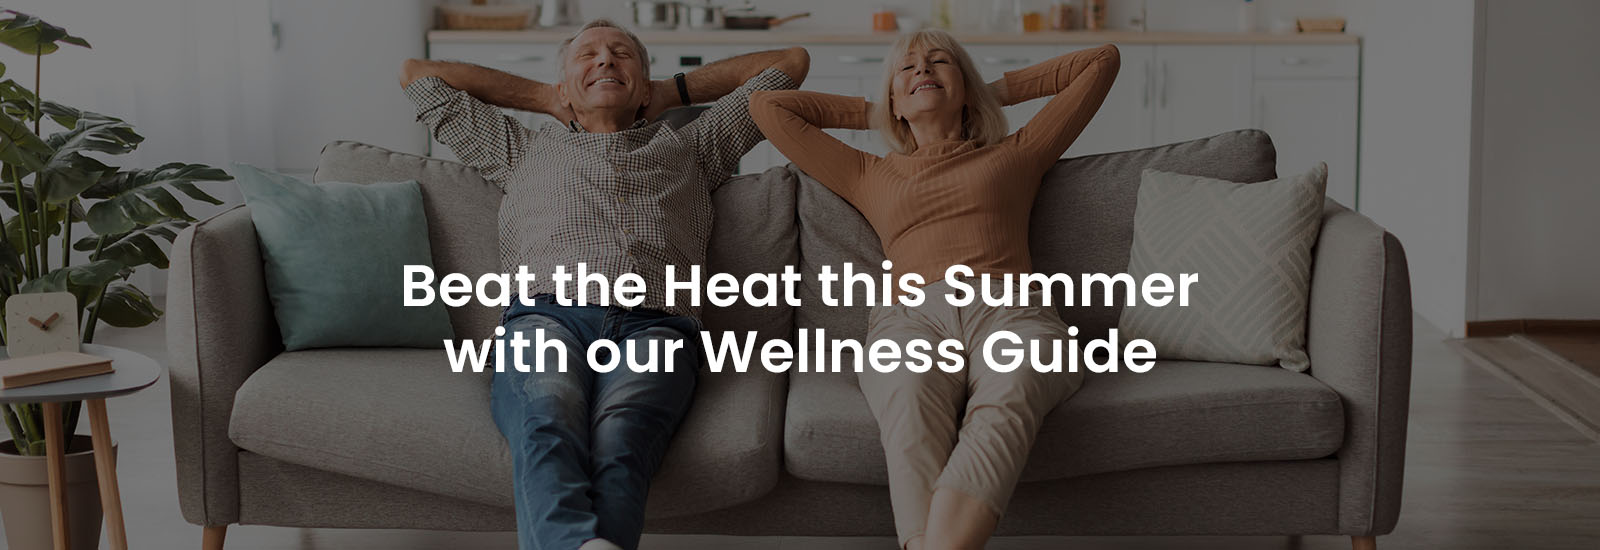 Beat the Heat this Summer With Our Wellness Guide | Banner Image